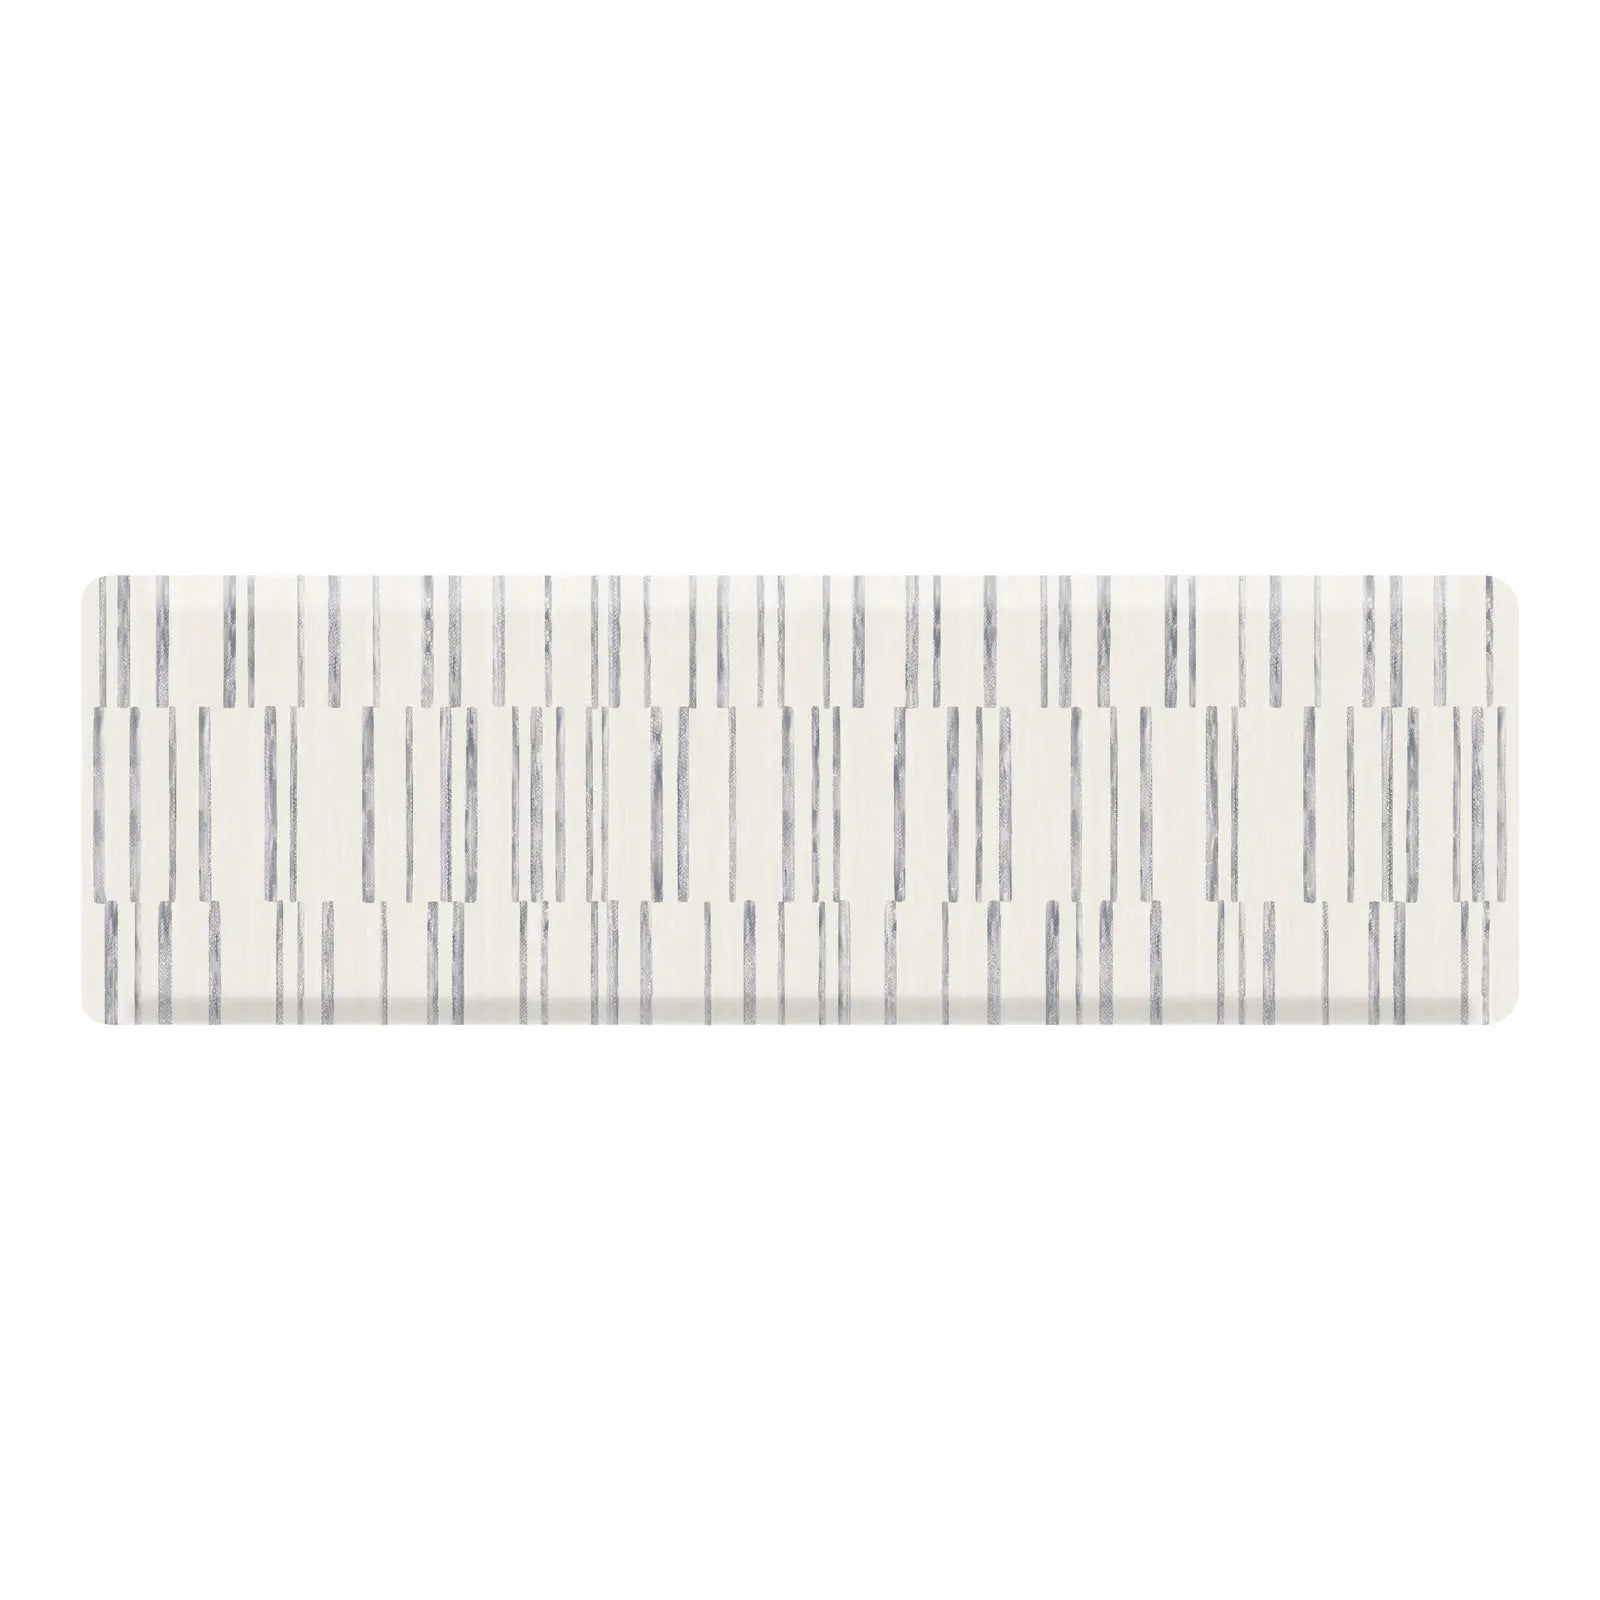 Gray and white inverted stripe kitchen mat shown in size 22x72